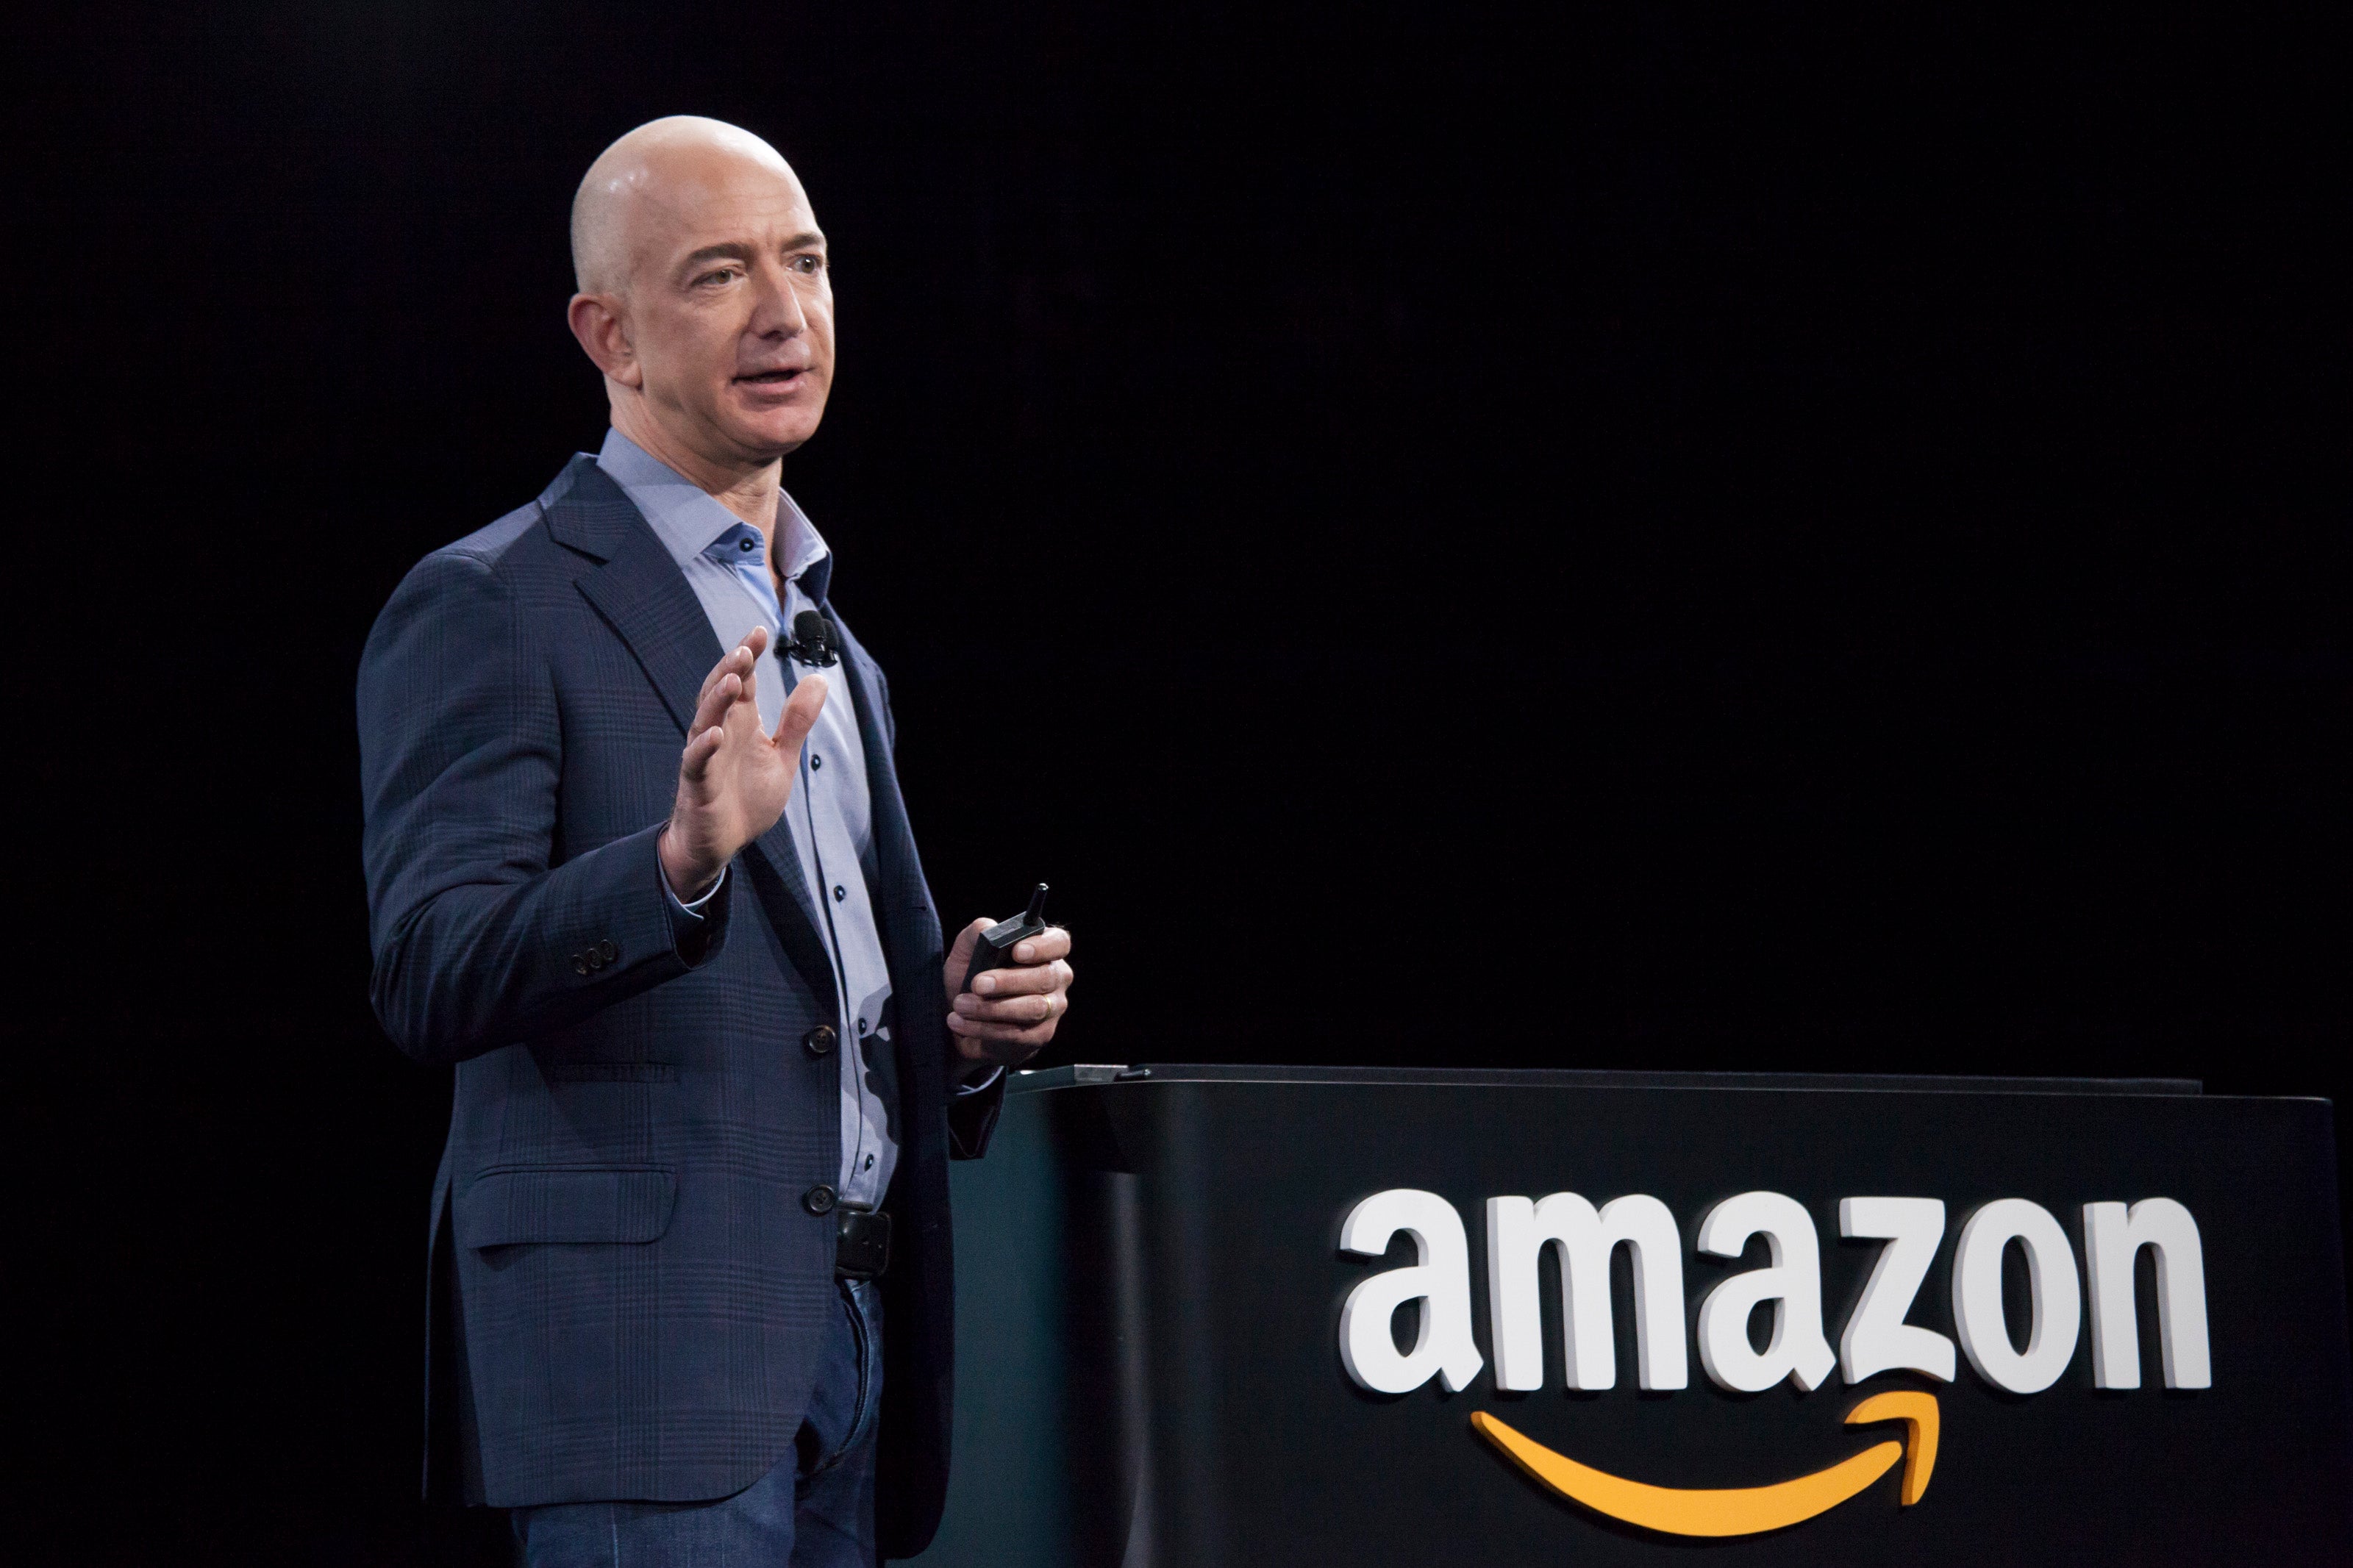 Amazon chief executive Jeff Bezos has been urged to pay the company’s workers better and protect the environment